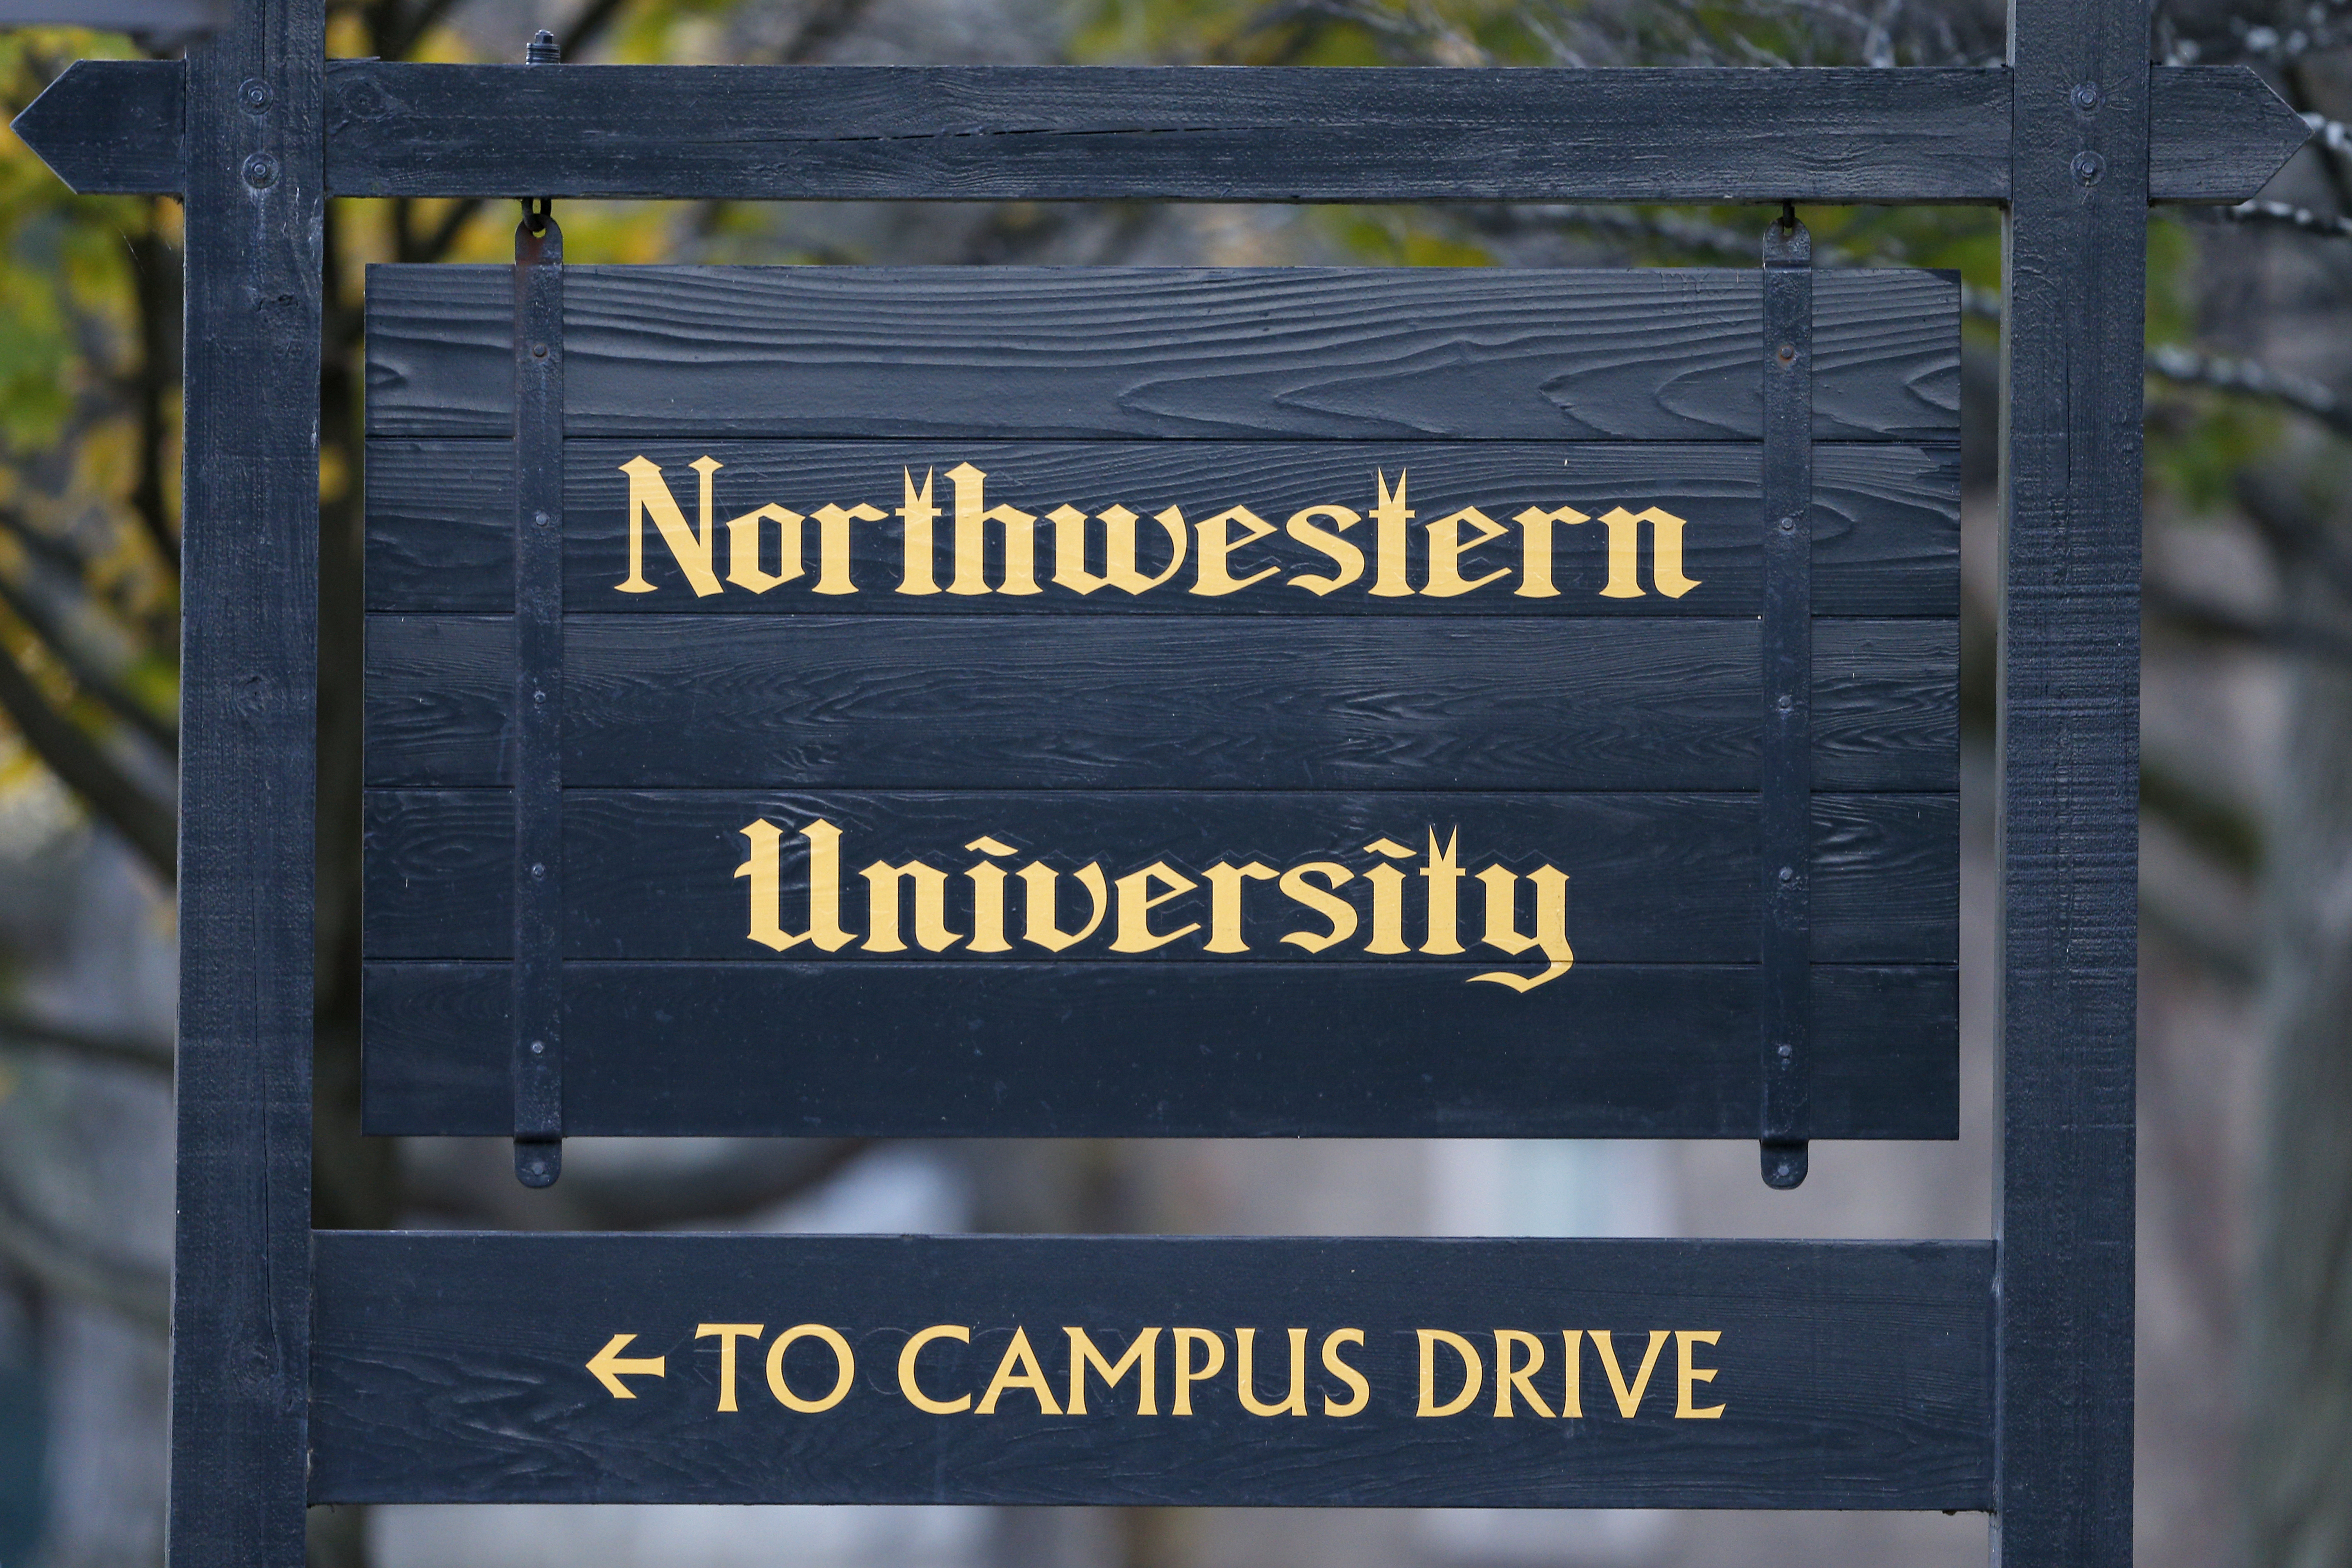 The Northwestern University campus sign. Editors at the school's newspaper have faced a backlash from professional journalists for apologizing for how they covered student protests